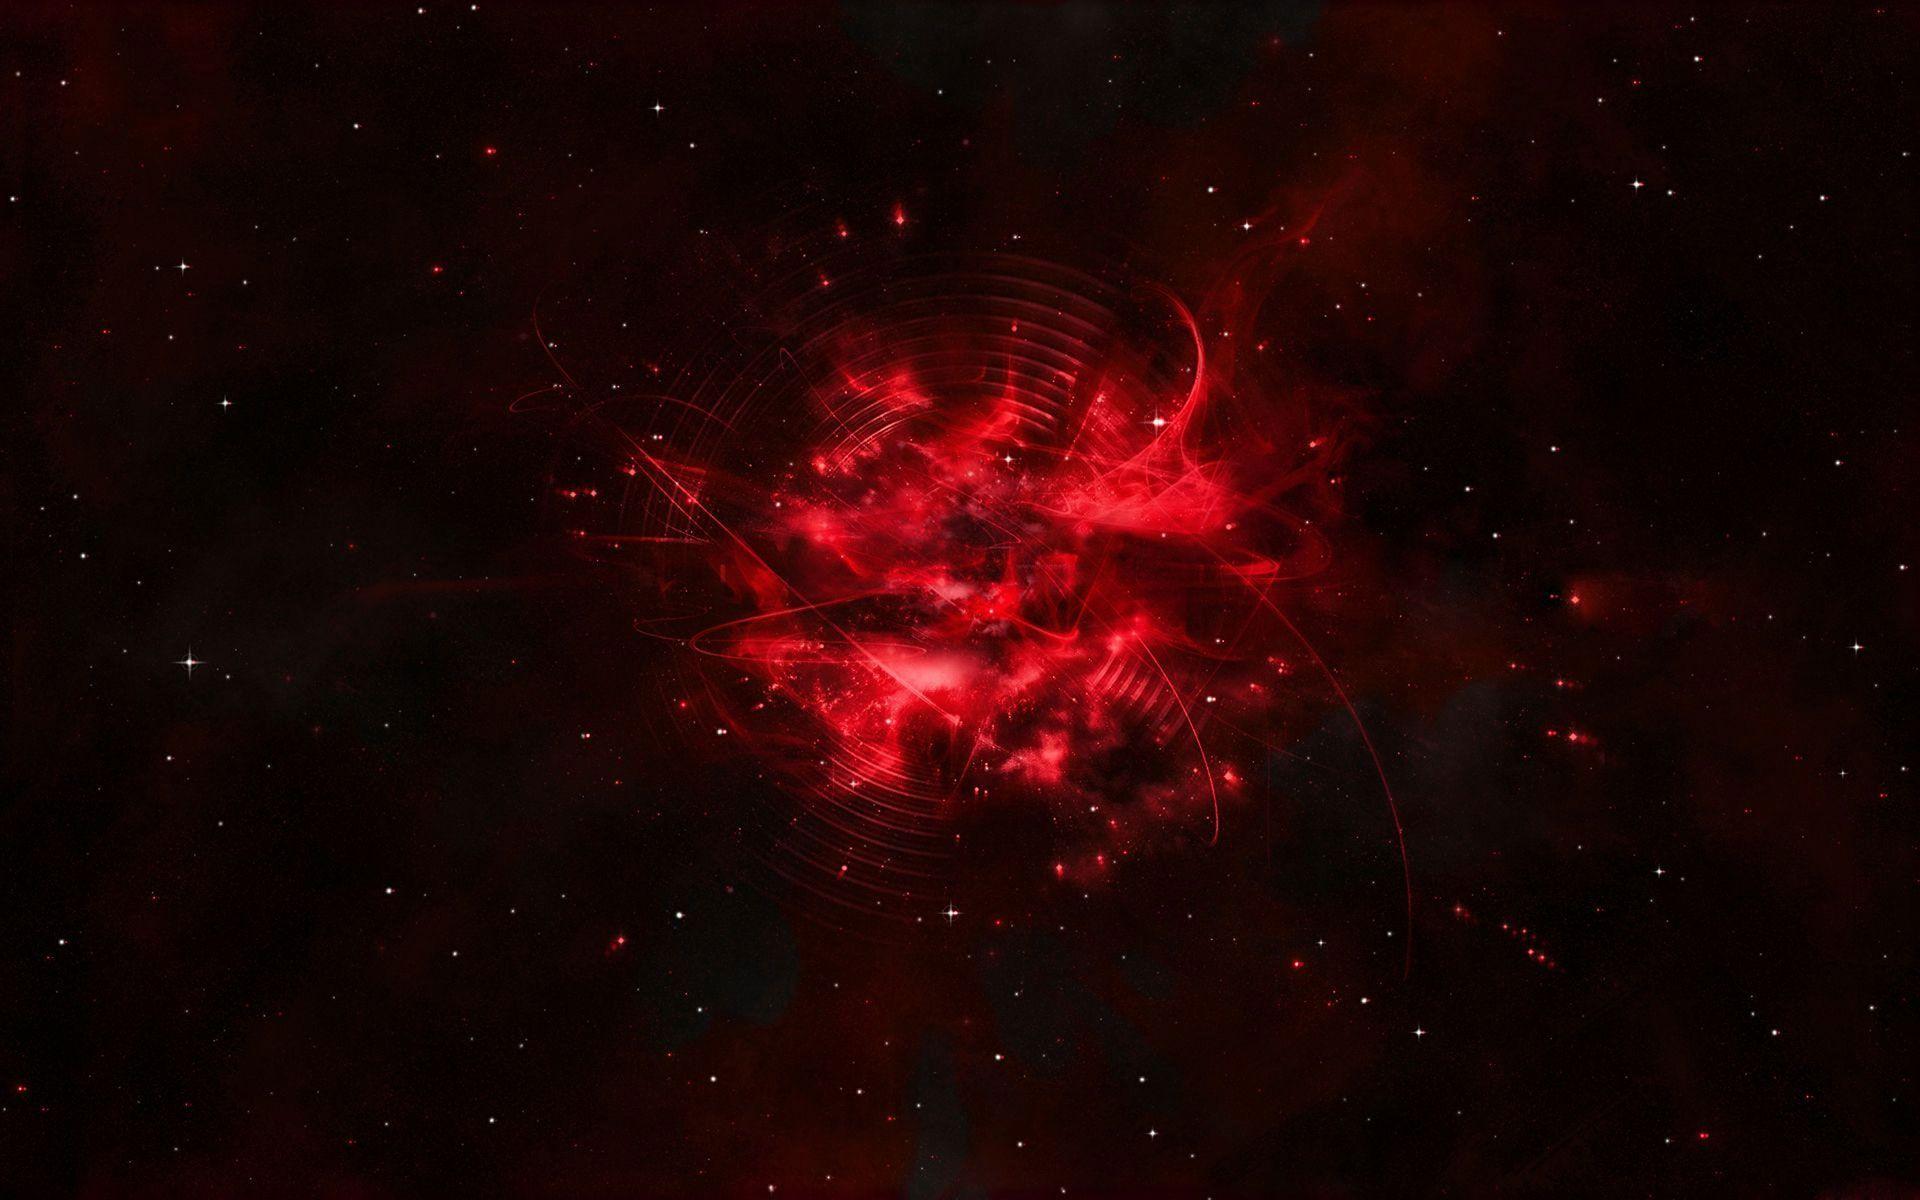 red and black space wallpaper